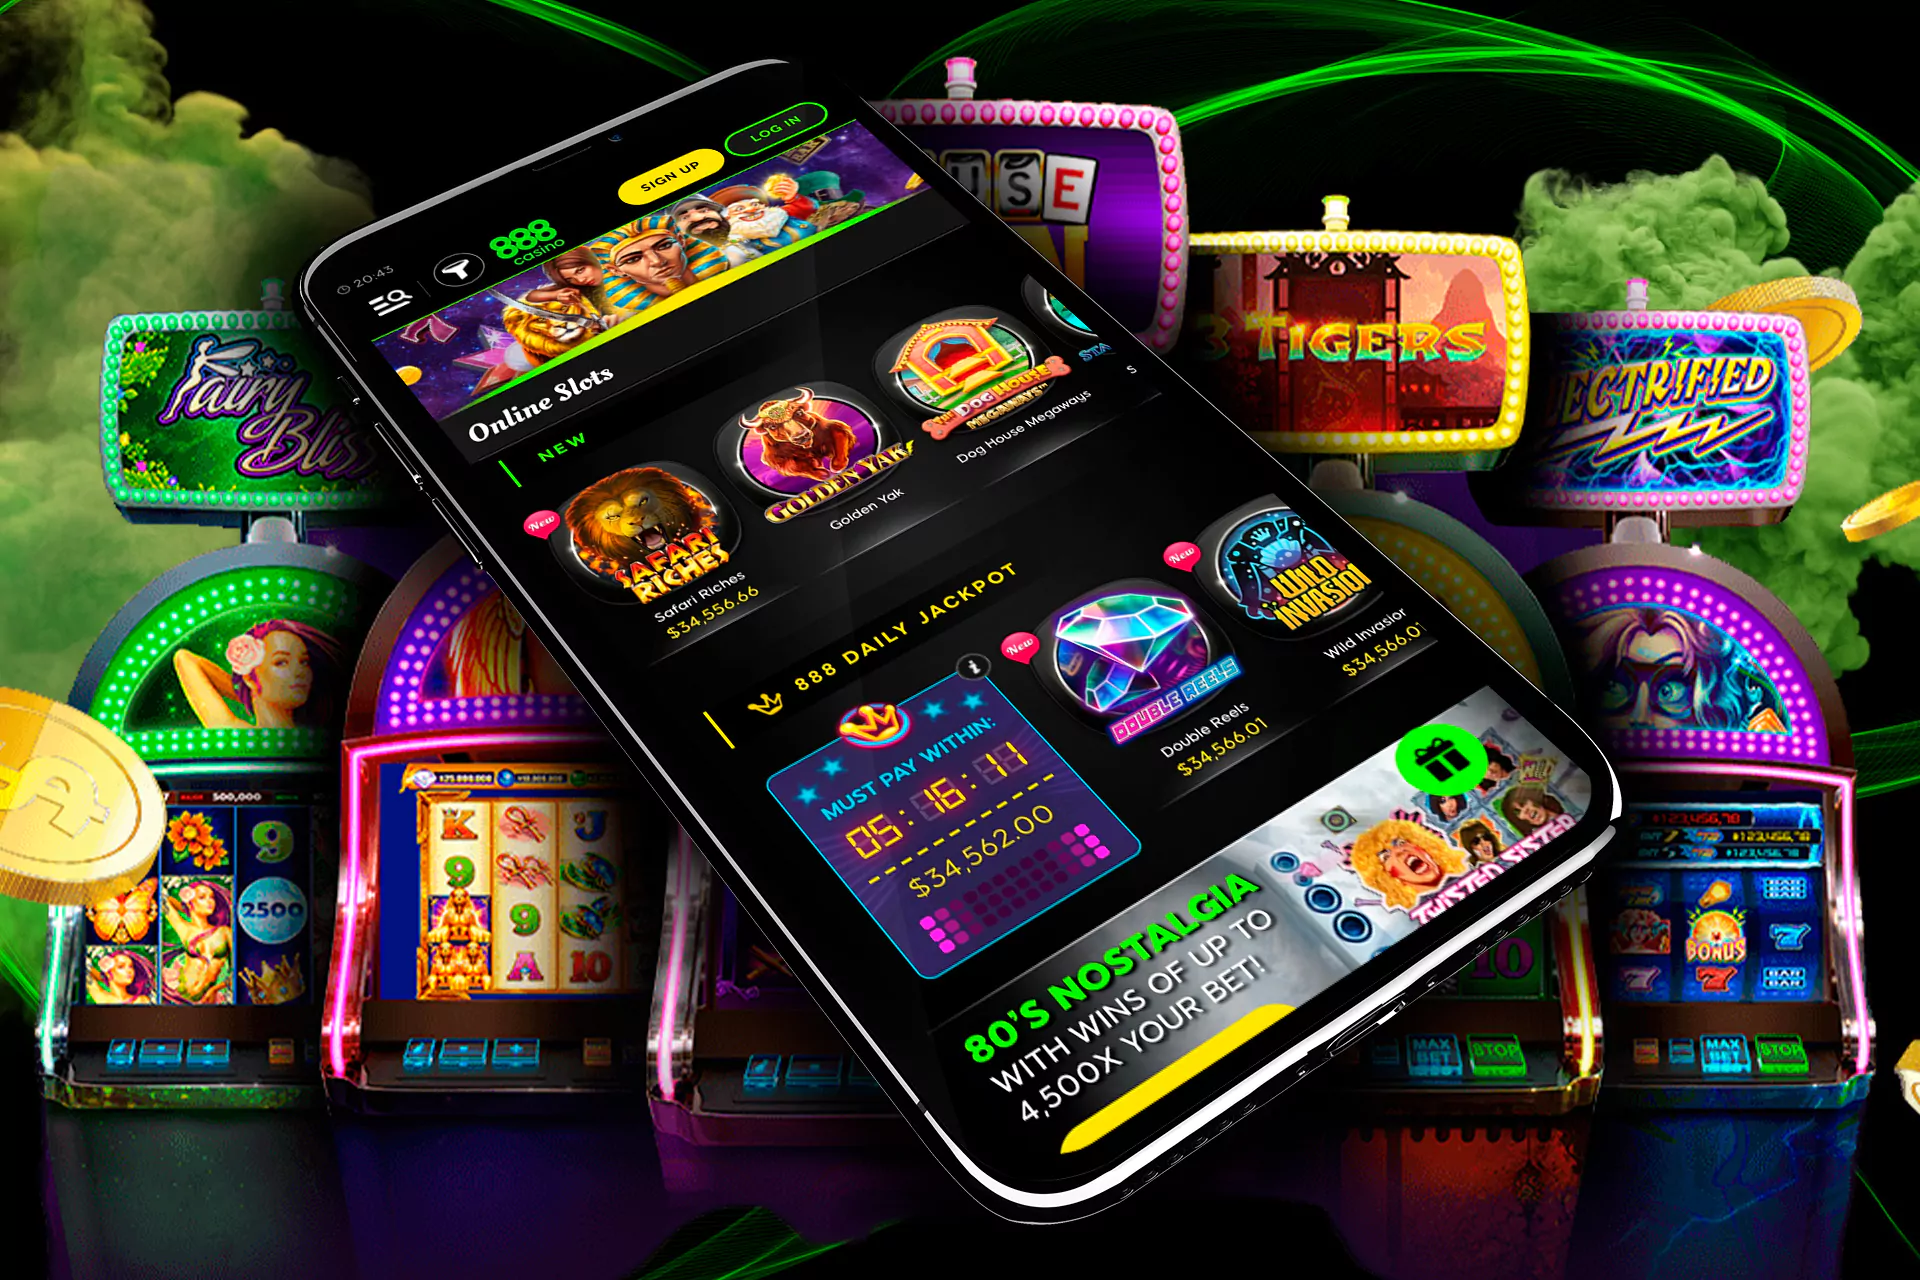 You cna play classical slots in the app.